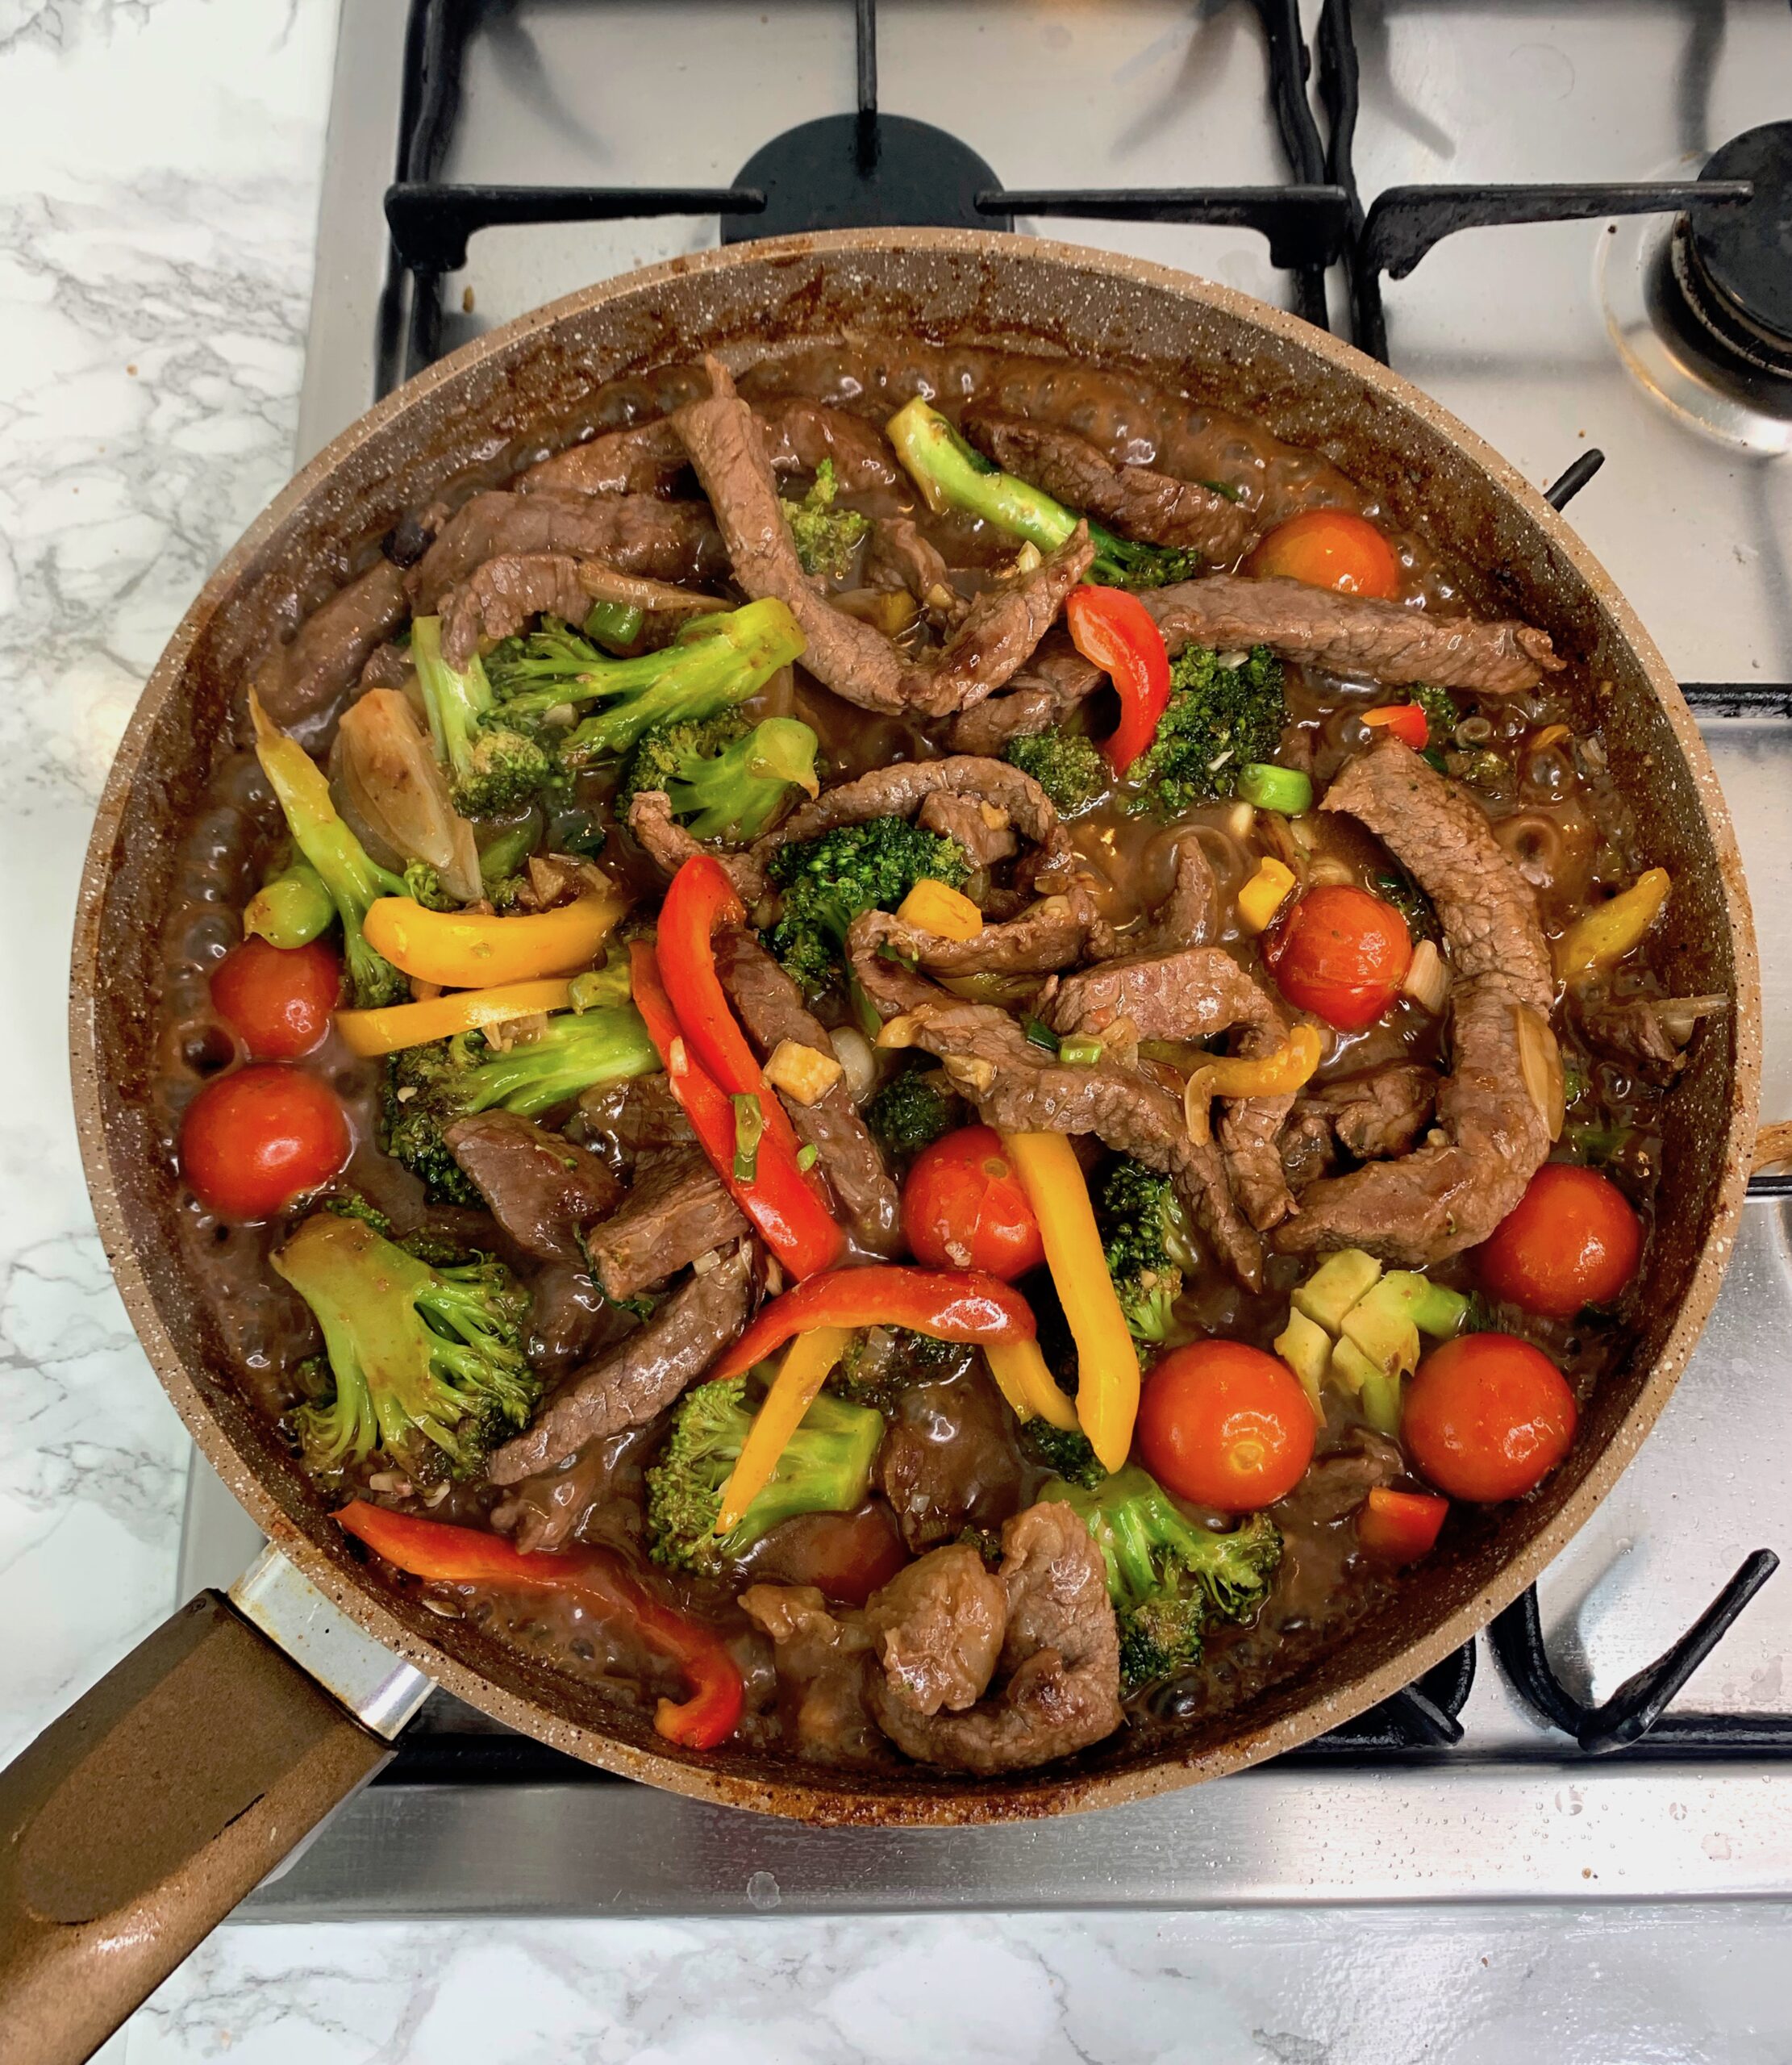 Beef and Broccoli Stir-fry at home 